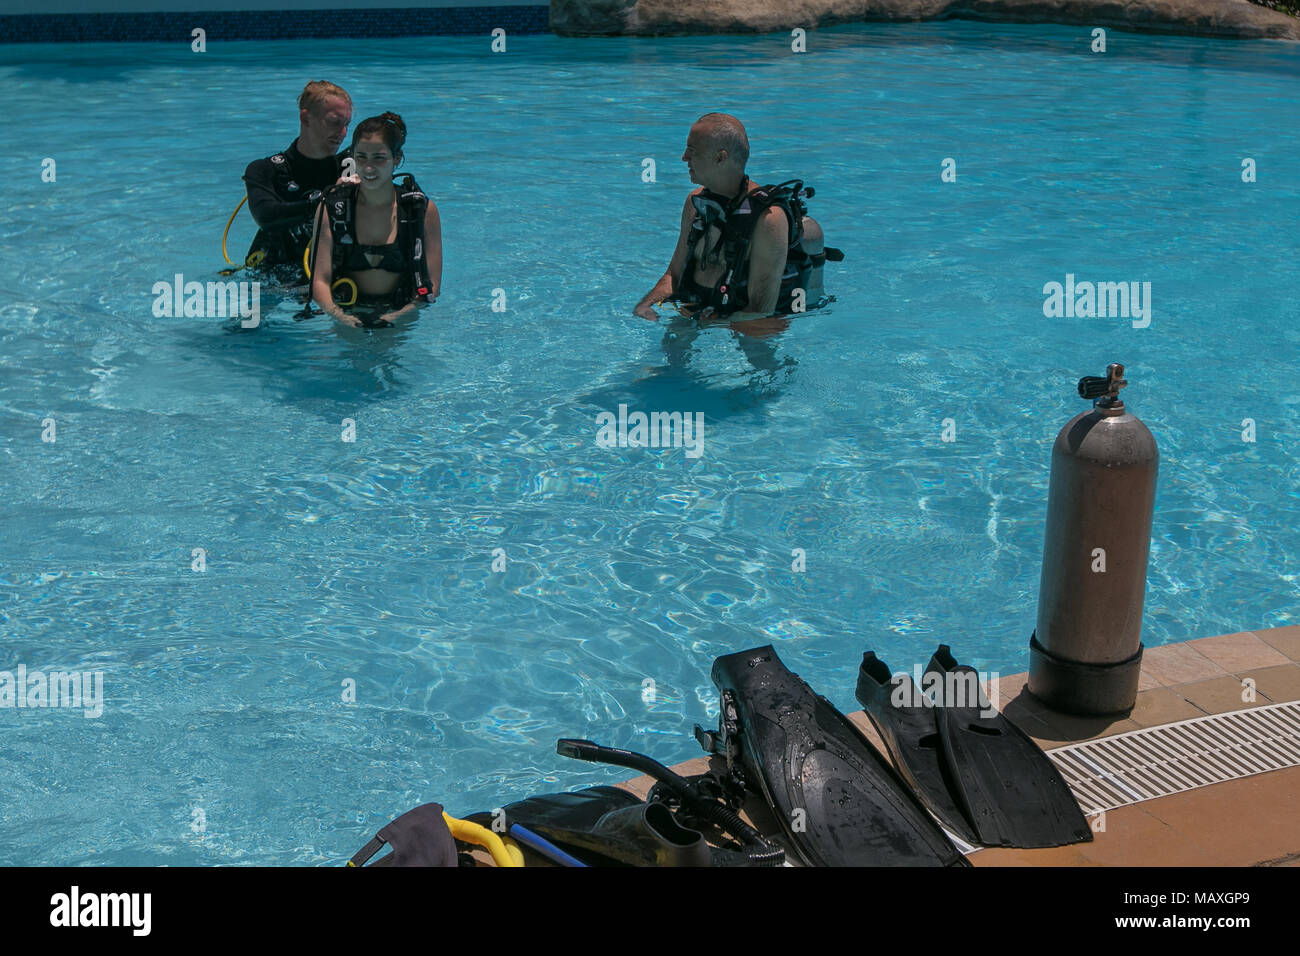 Bridgetown, Barbados, March 19, 2018: People are taking initial SCUBA lessons in a hotel pool. Stock Photo